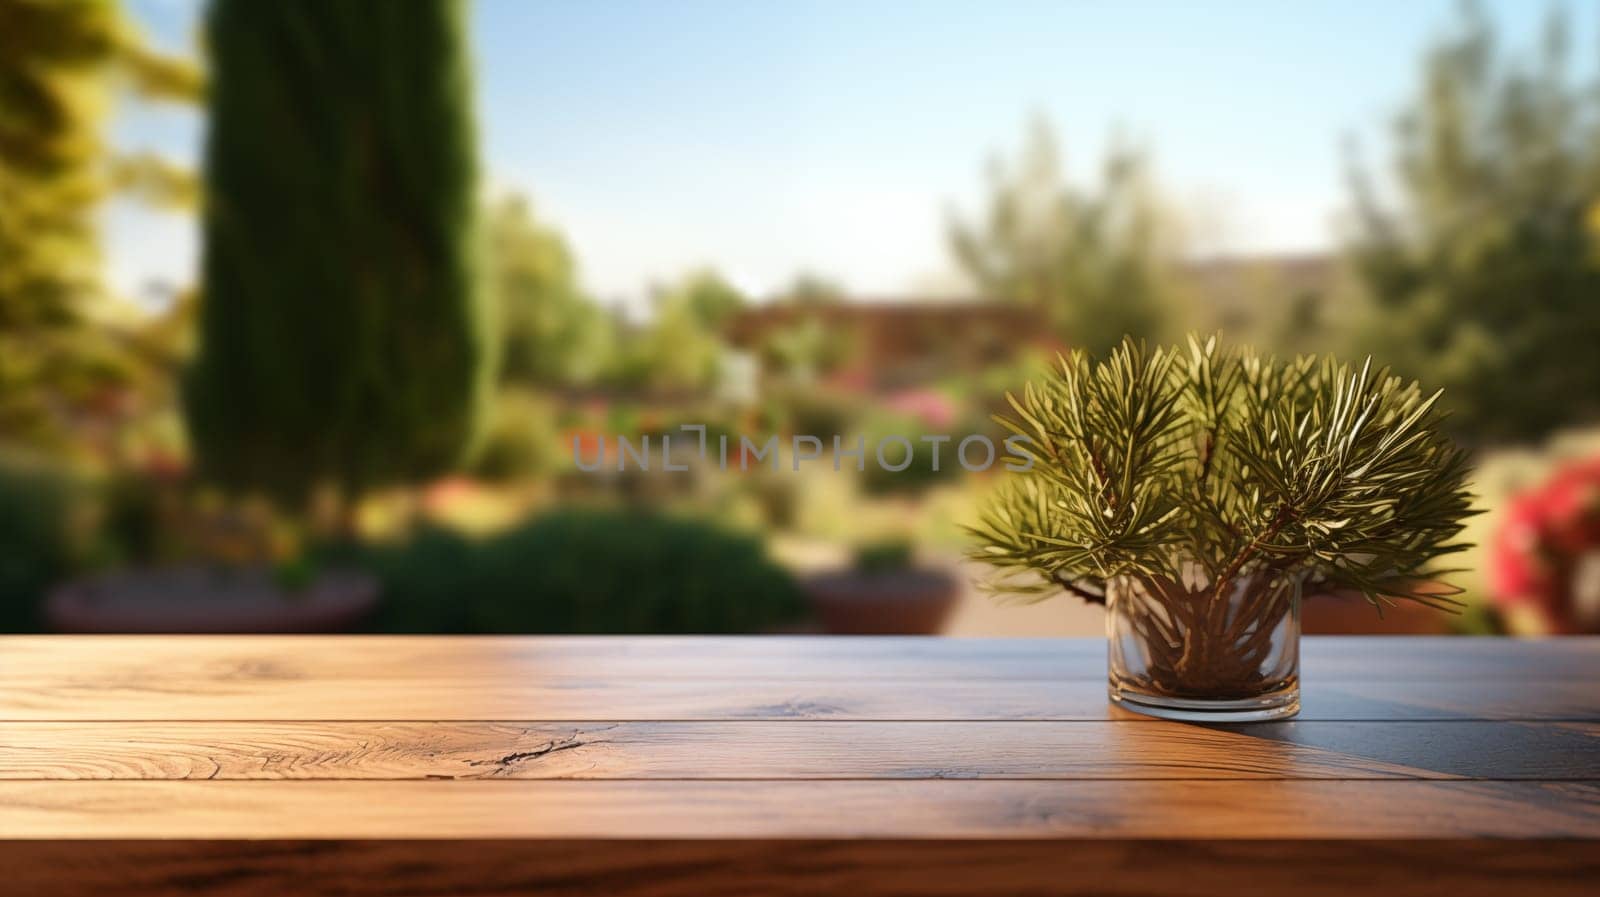 Peaceful garden scene with warm sunlit foliage and green coniferous plant on wooden table. by Zakharova